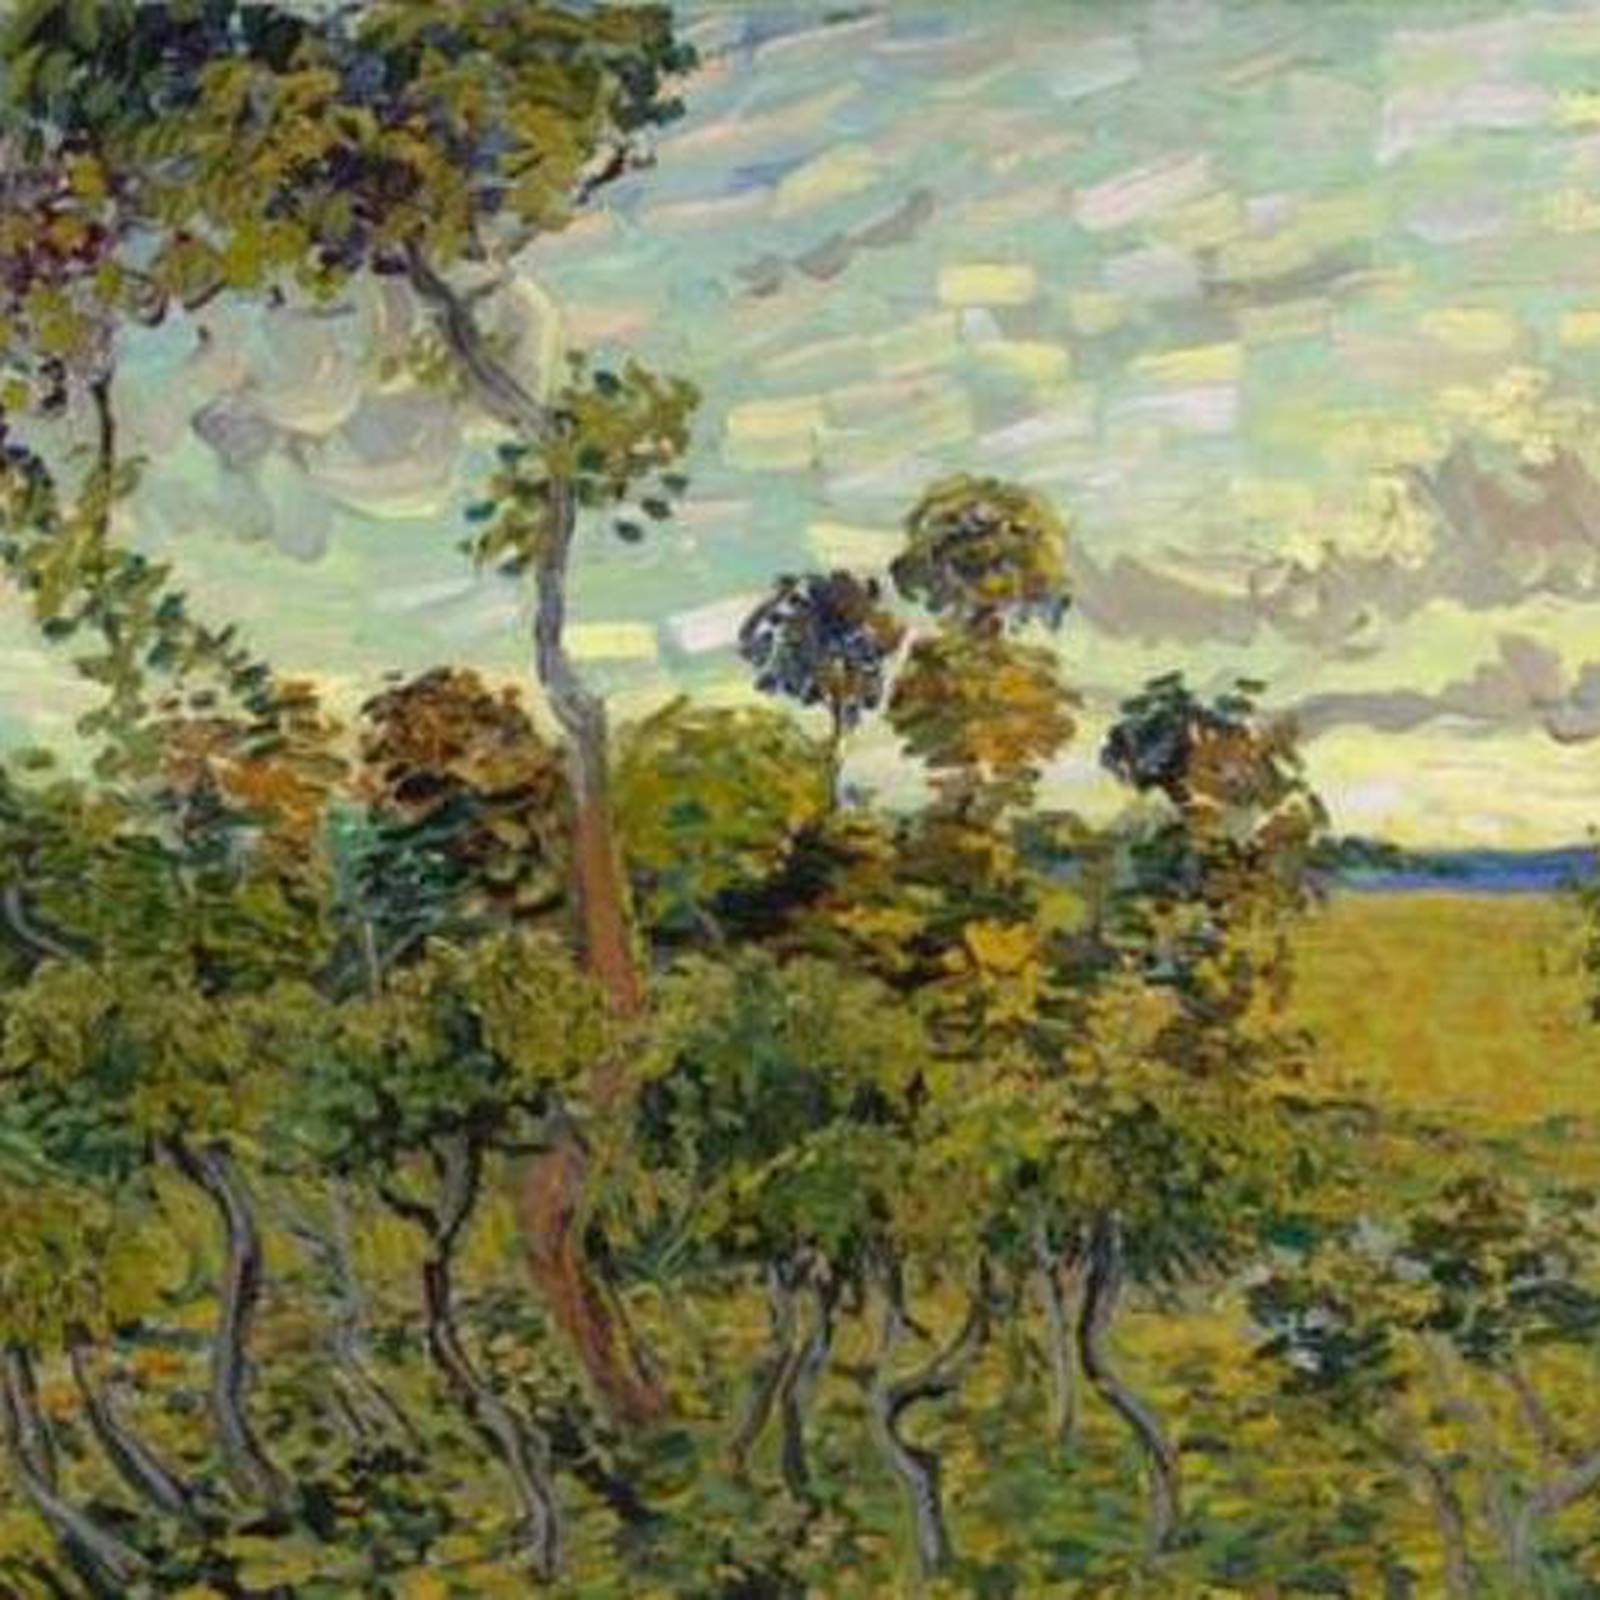 Long-lost Vincent van Gogh painting identified